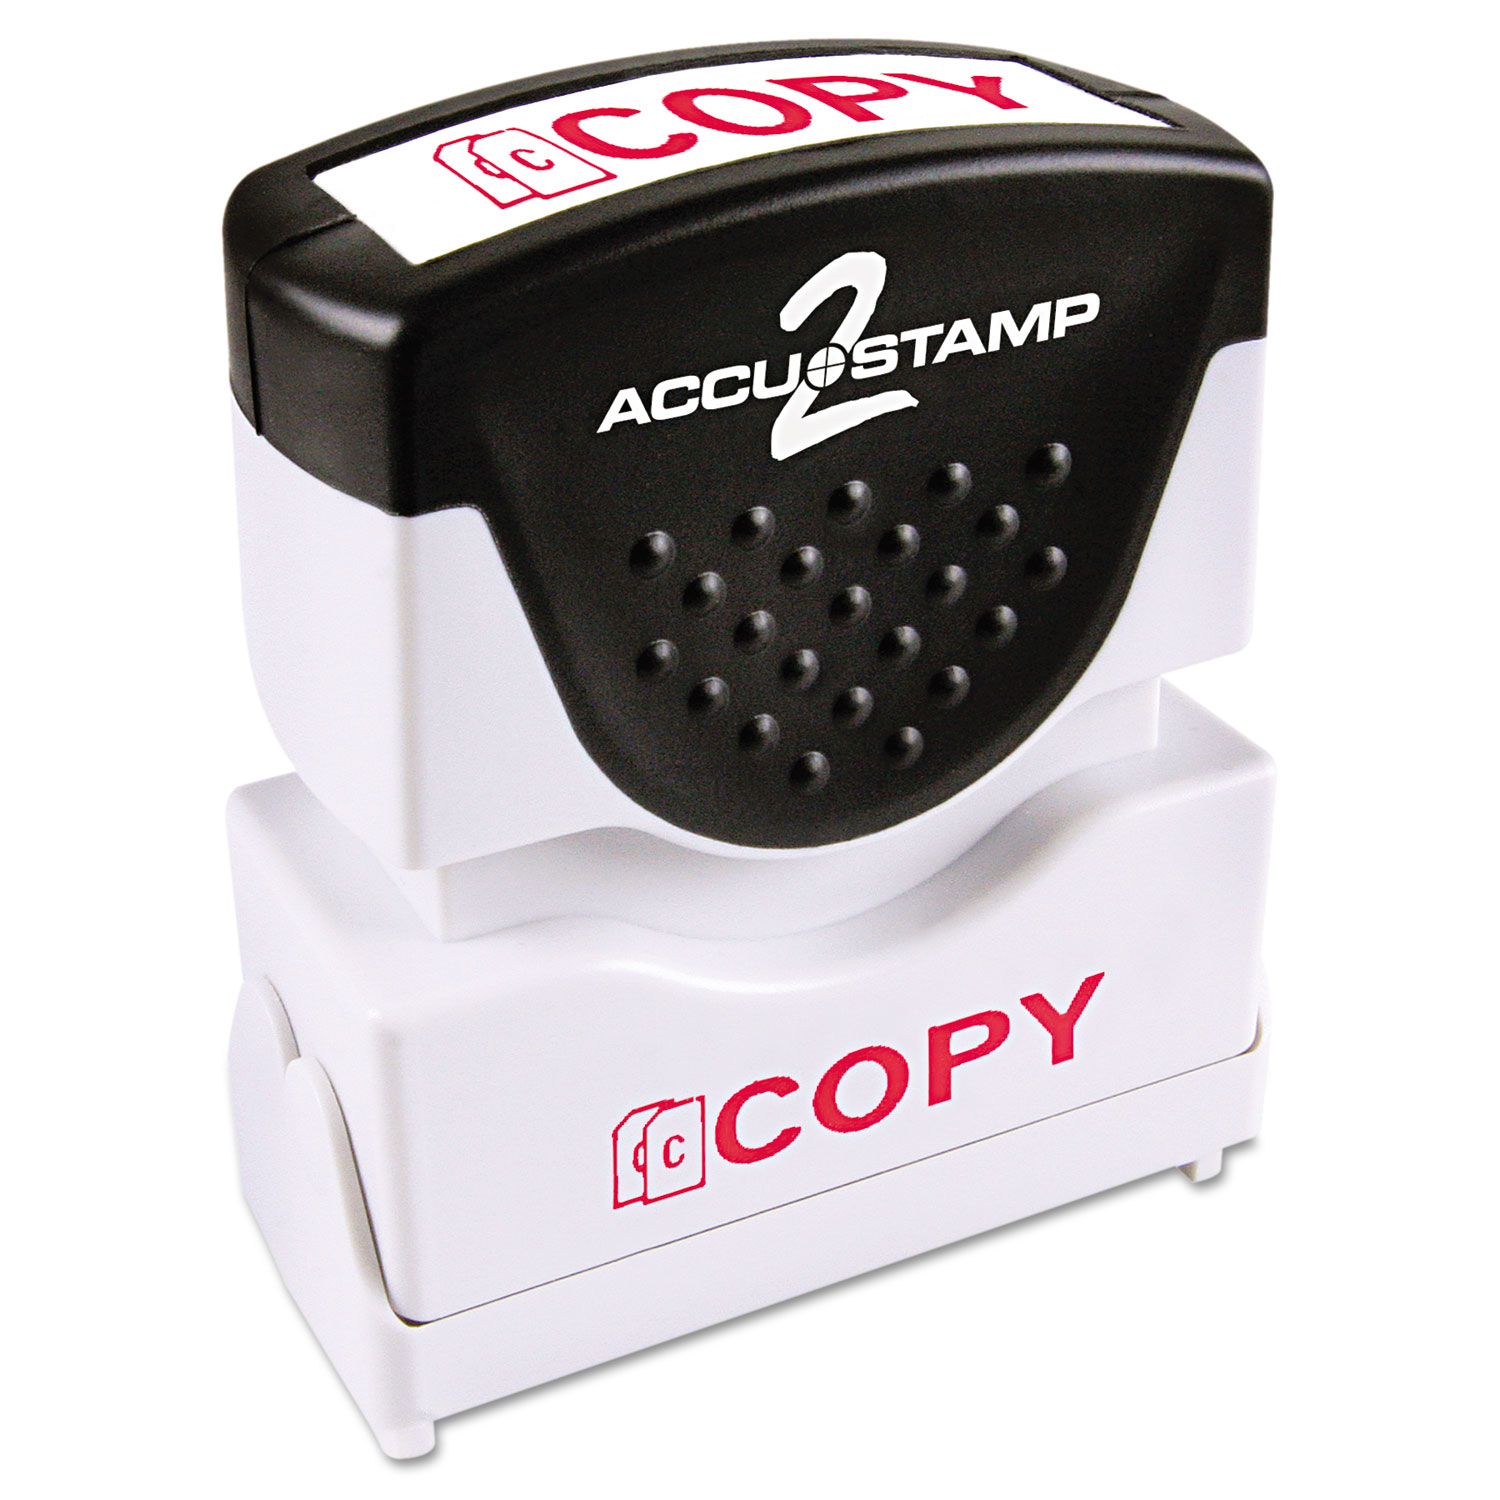  ACCUSTAMP2 035594 Pre-Inked Shutter Stamp, Red, COPY, 1 5/8 x 1/2 (COS035594) 